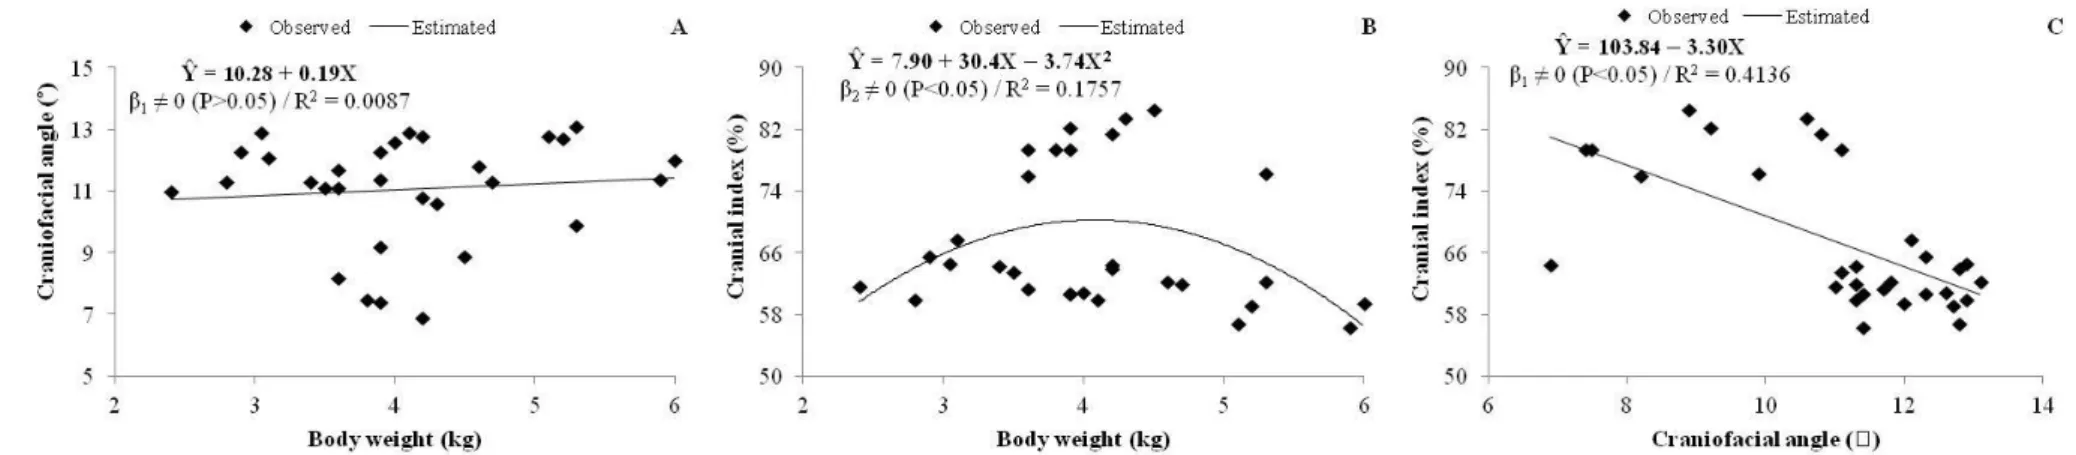 Figure 4. Regression analysis between craniofacial angle and weight (A), cranial index and weight  (B), and cranial index and craniofacial angle (C) in domestic cats  (grouped data)